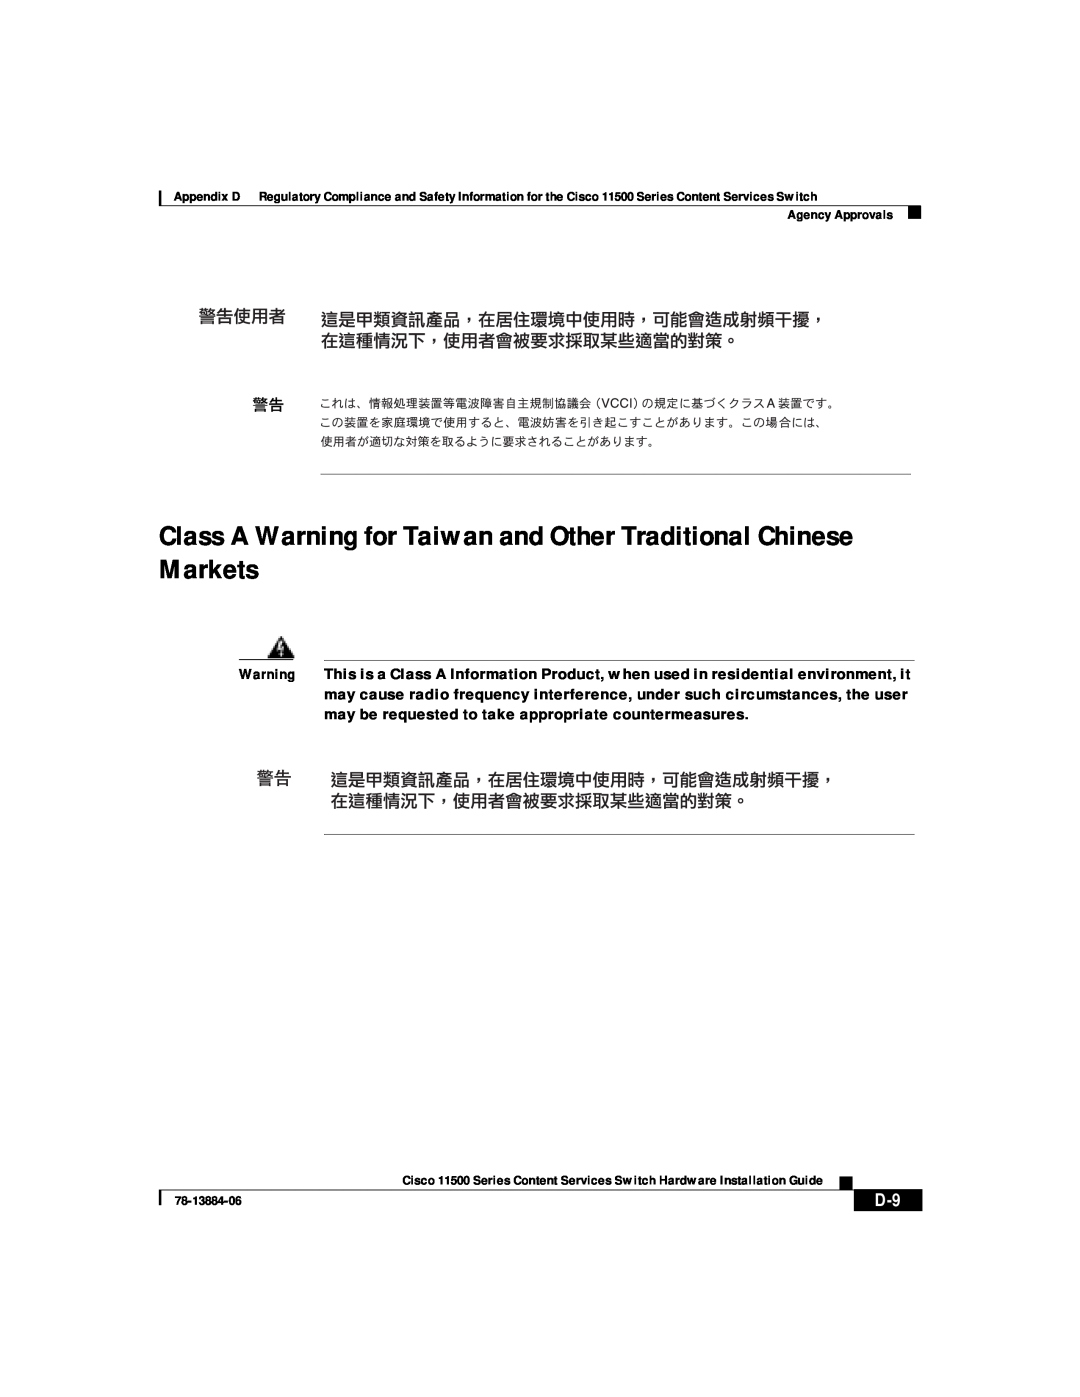 Cisco Systems 11500 Series manual Class A Warning for Taiwan and Other Traditional Chinese Markets 